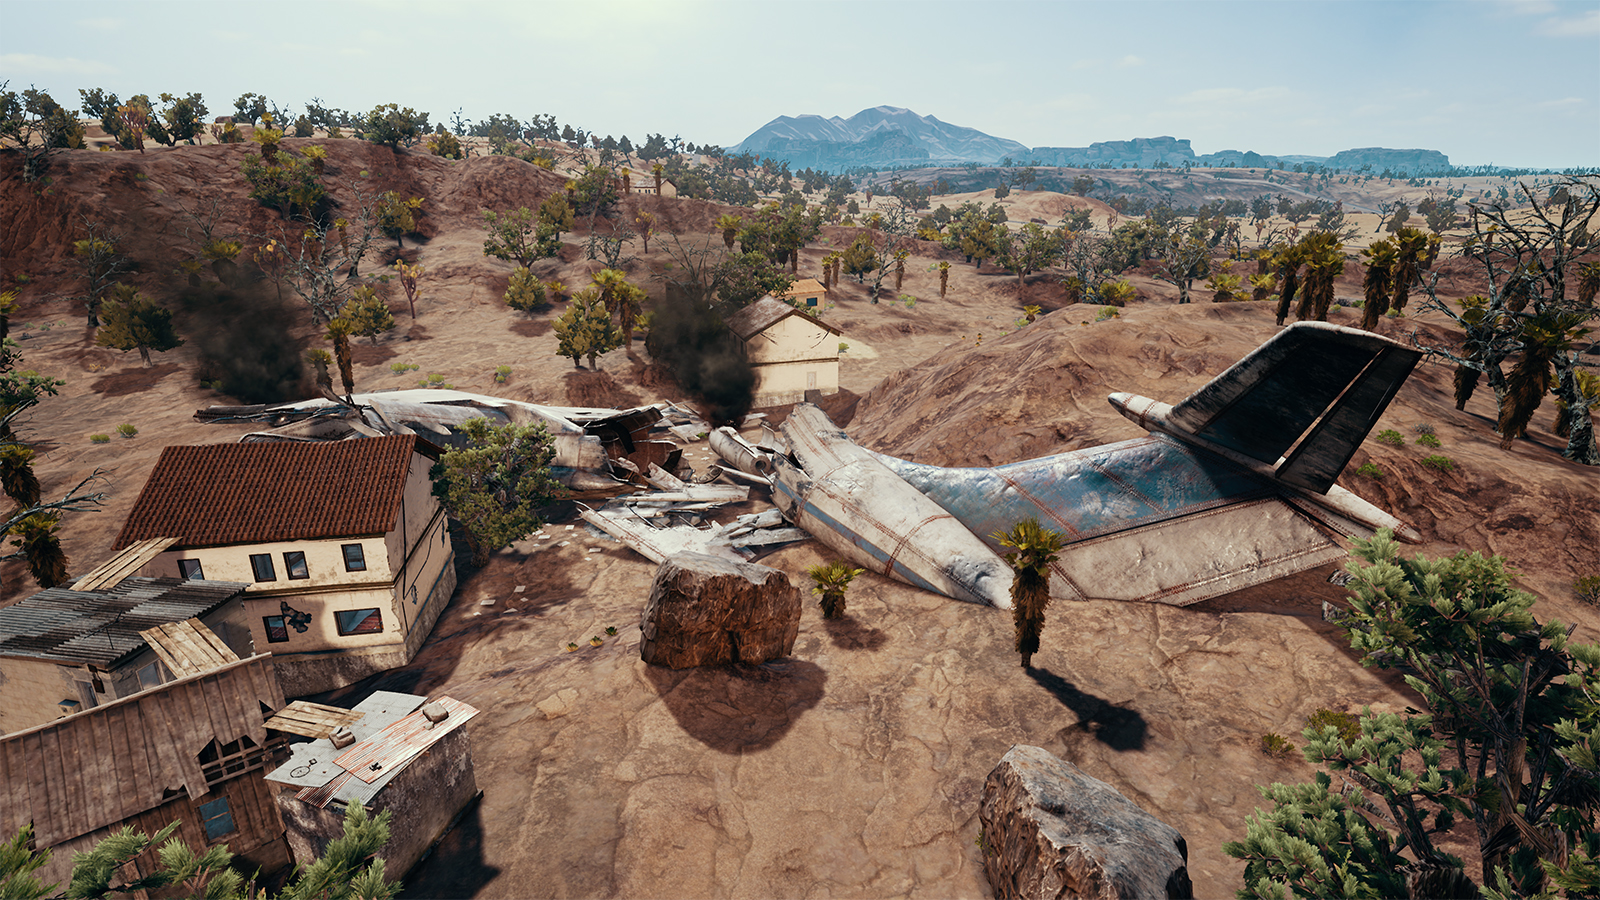 Hands On With PUBGs Desert Map And Vaulting System Plus Exclusive